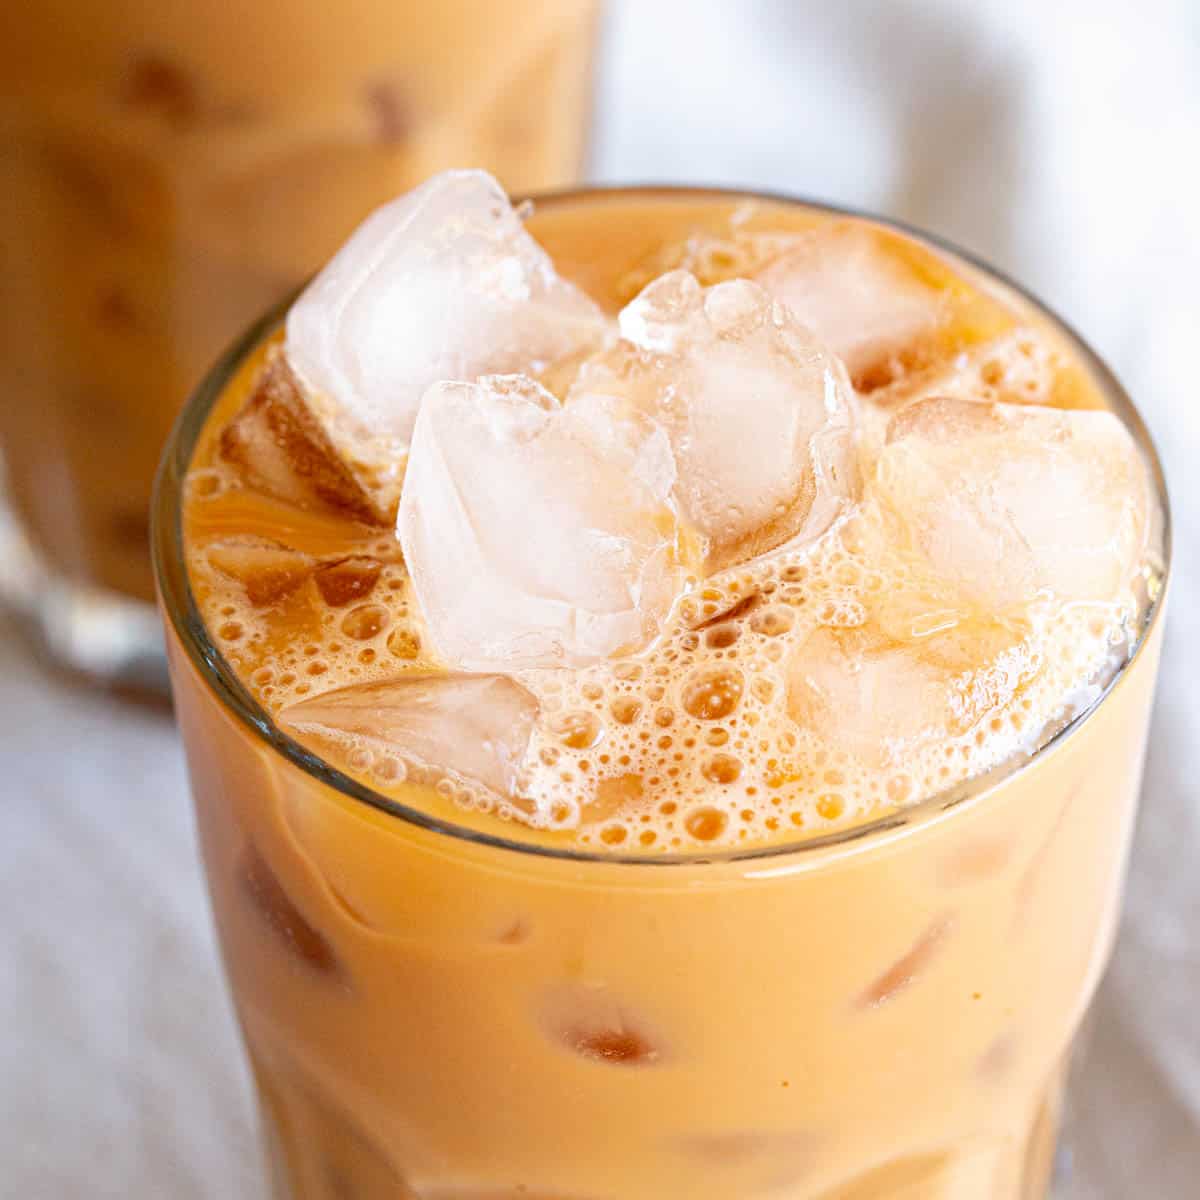 A frosty glass of Thai iced tea with ice cubes.